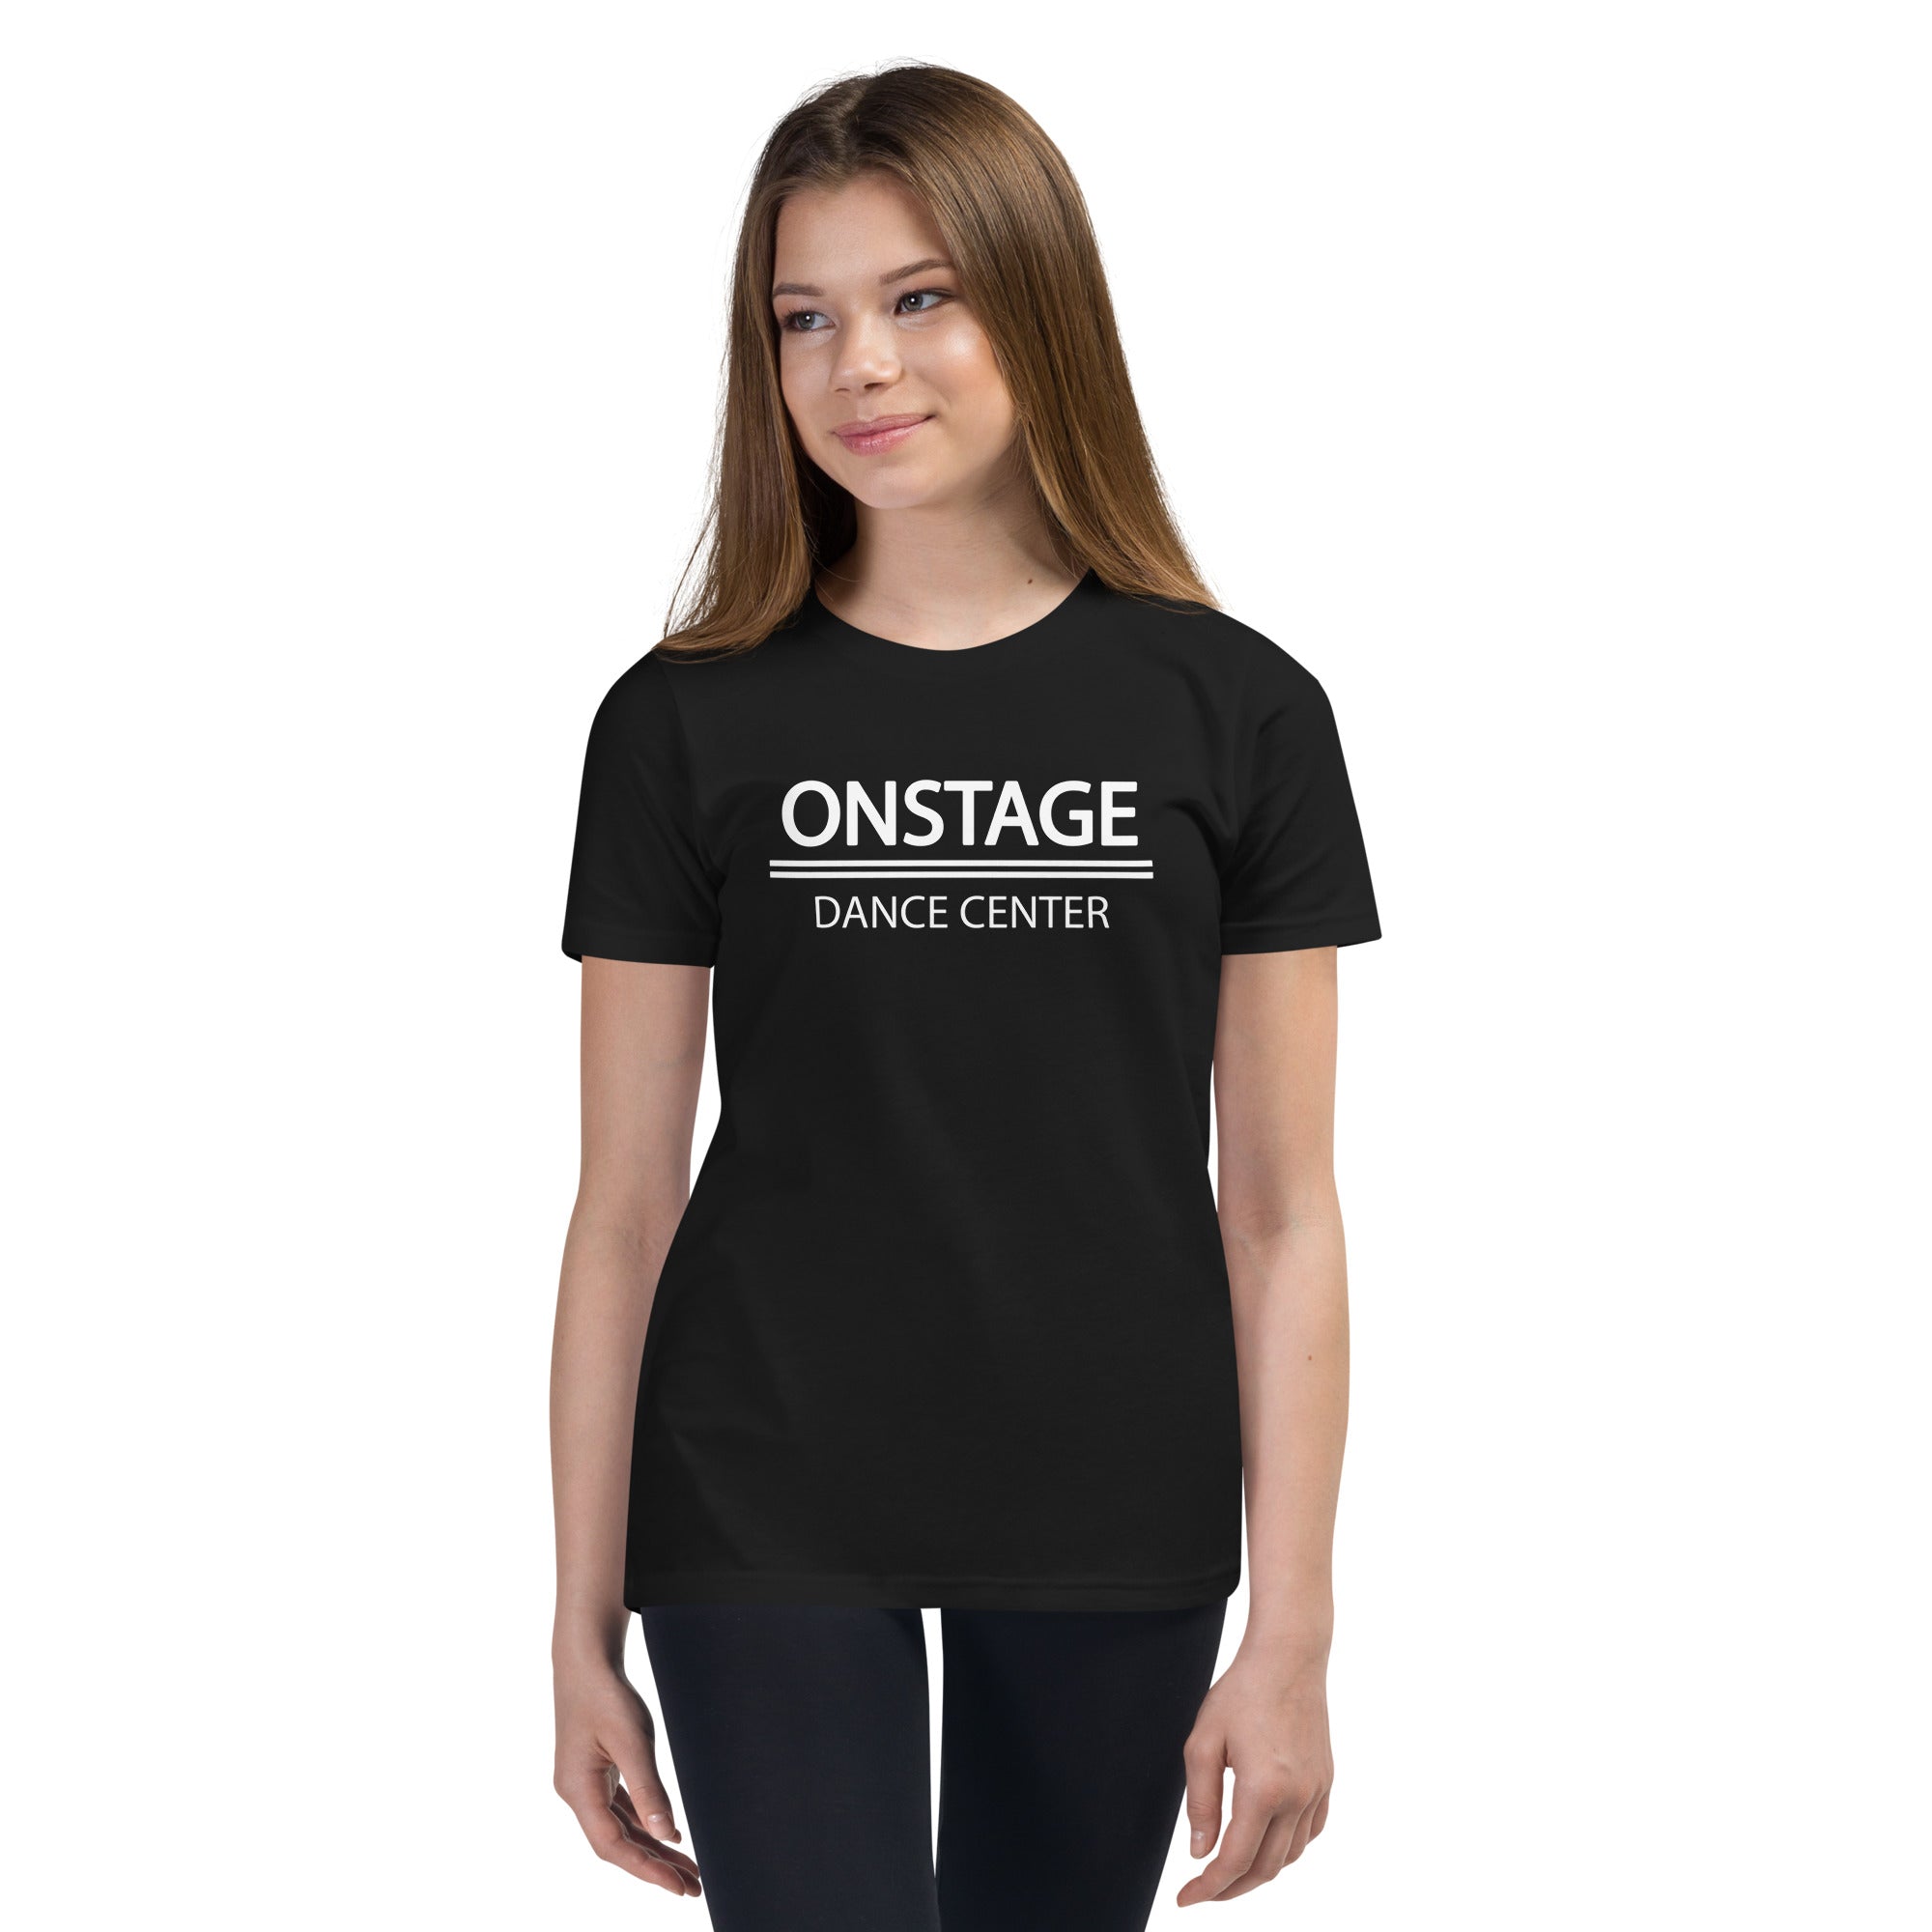 ONSTAGE Youth T-Shirt